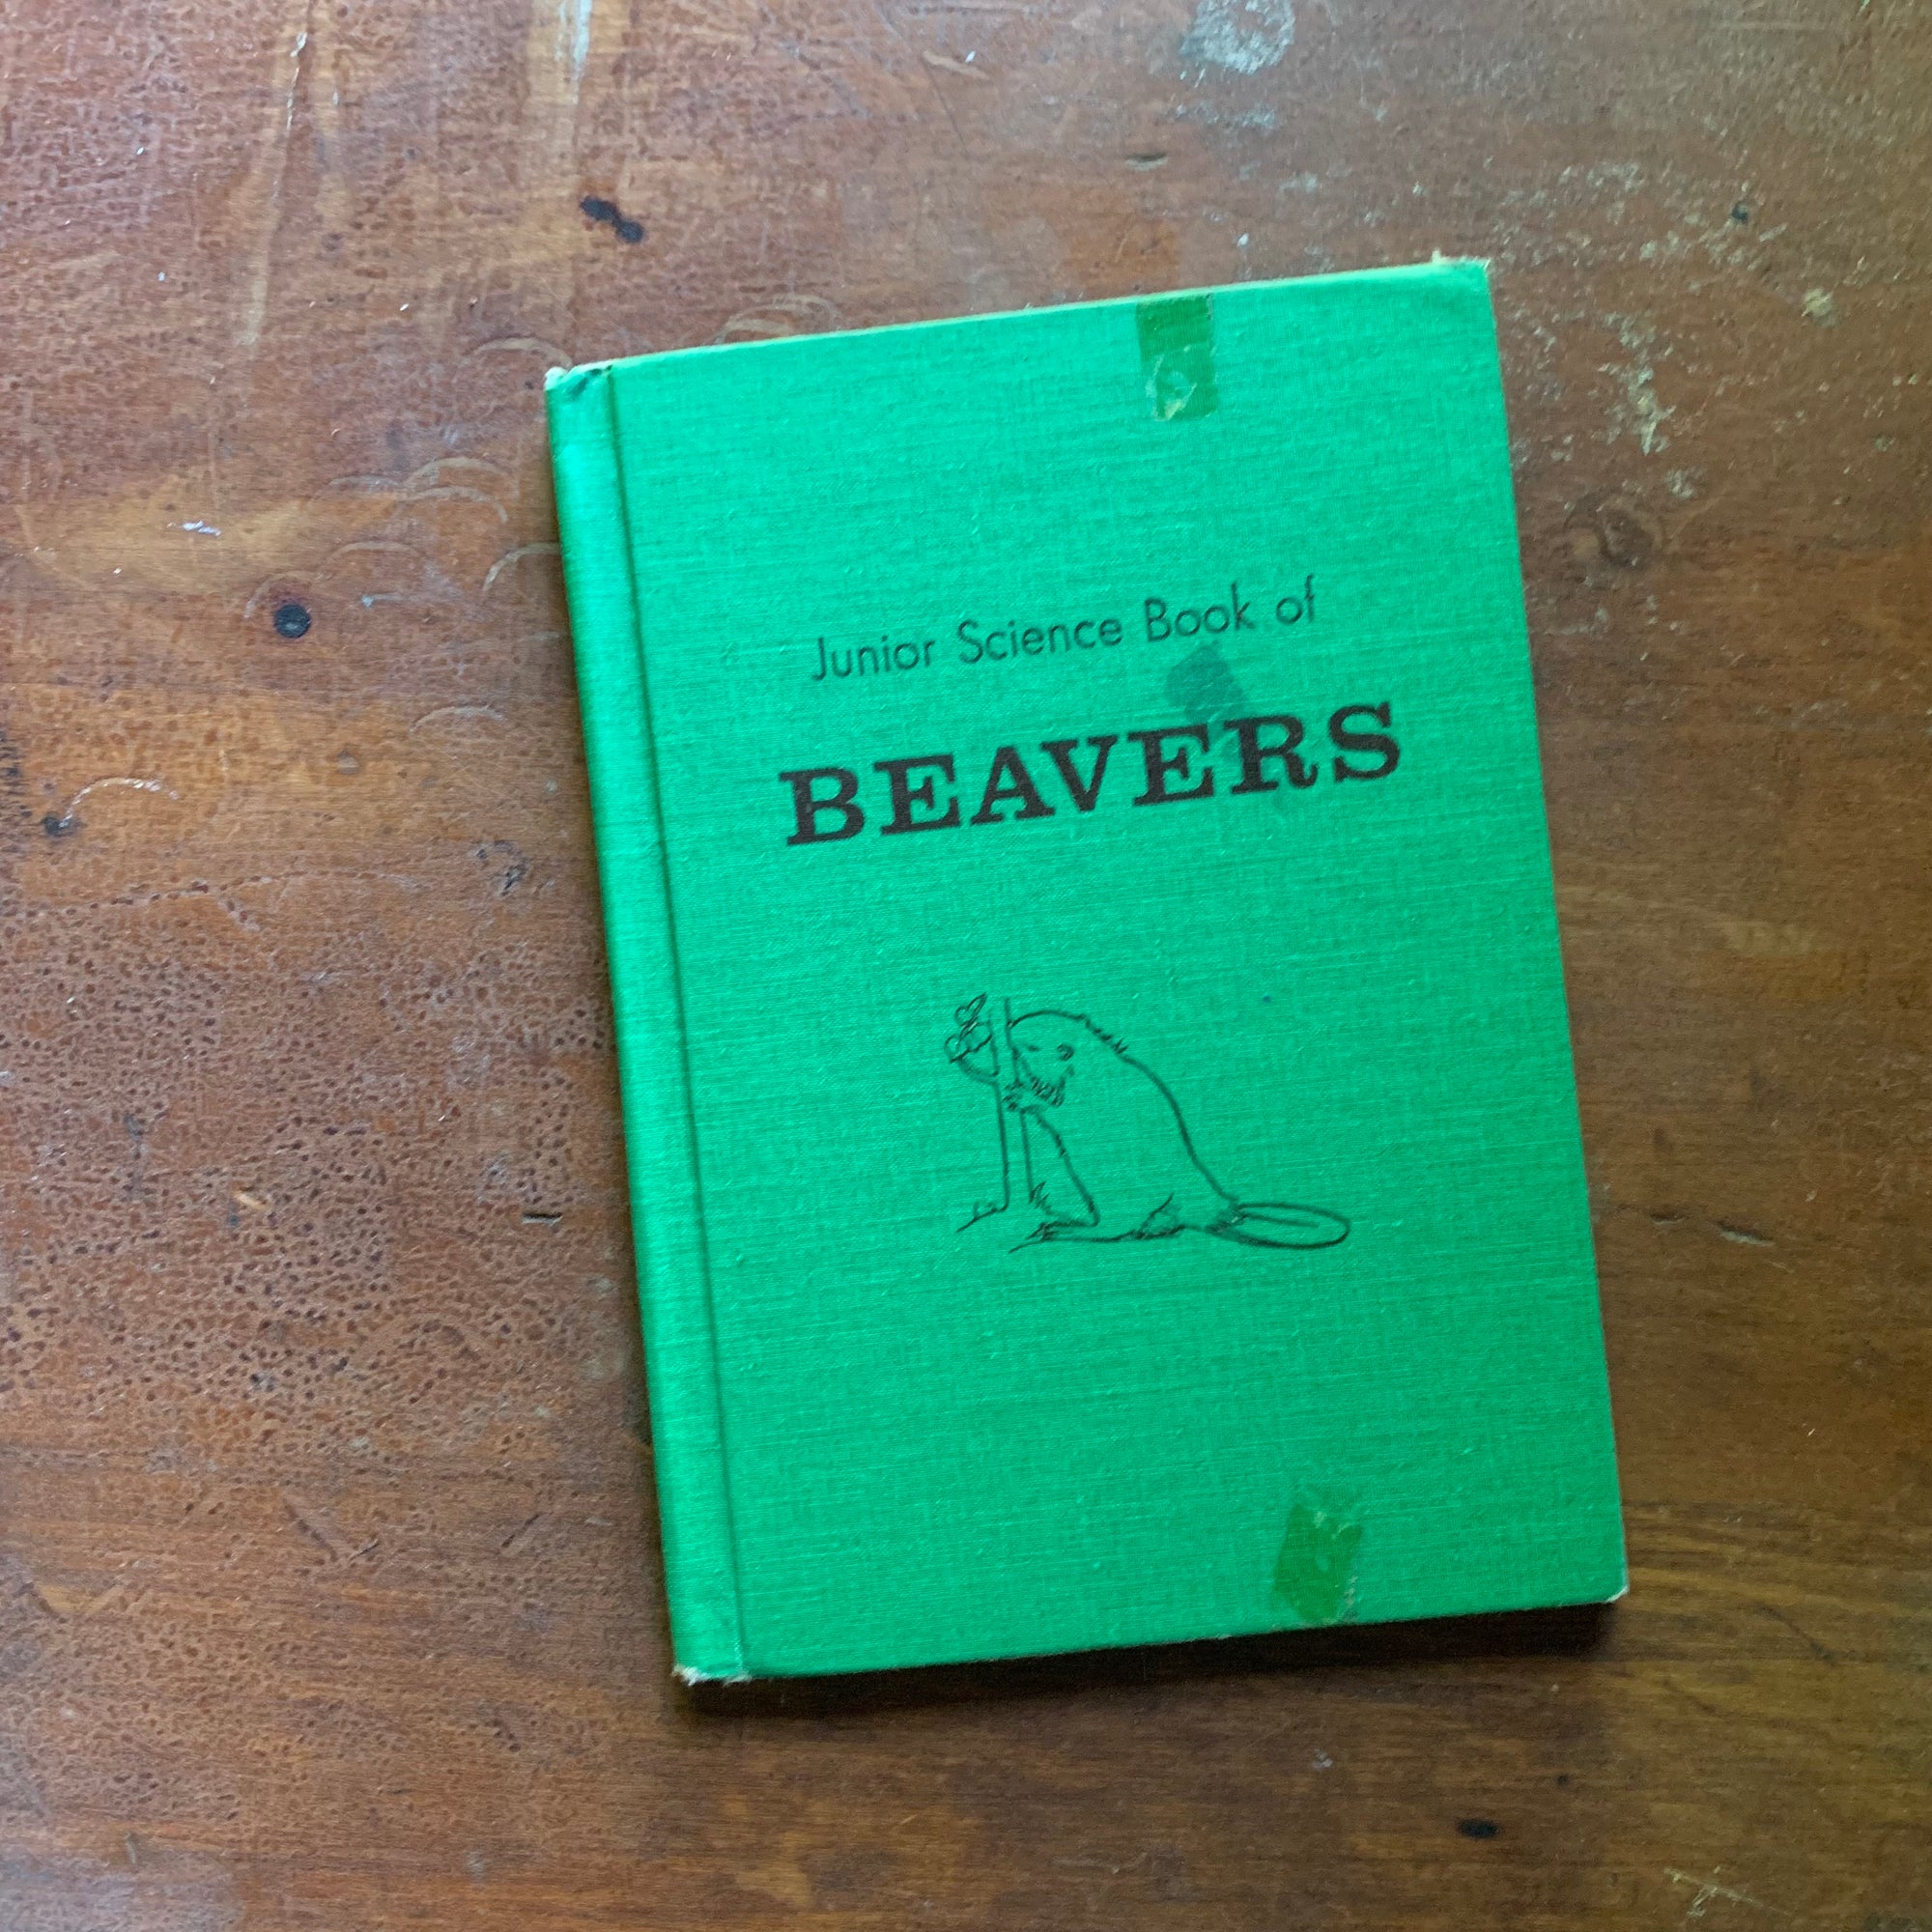 Junior Science Book of Beavers - view of the front cover